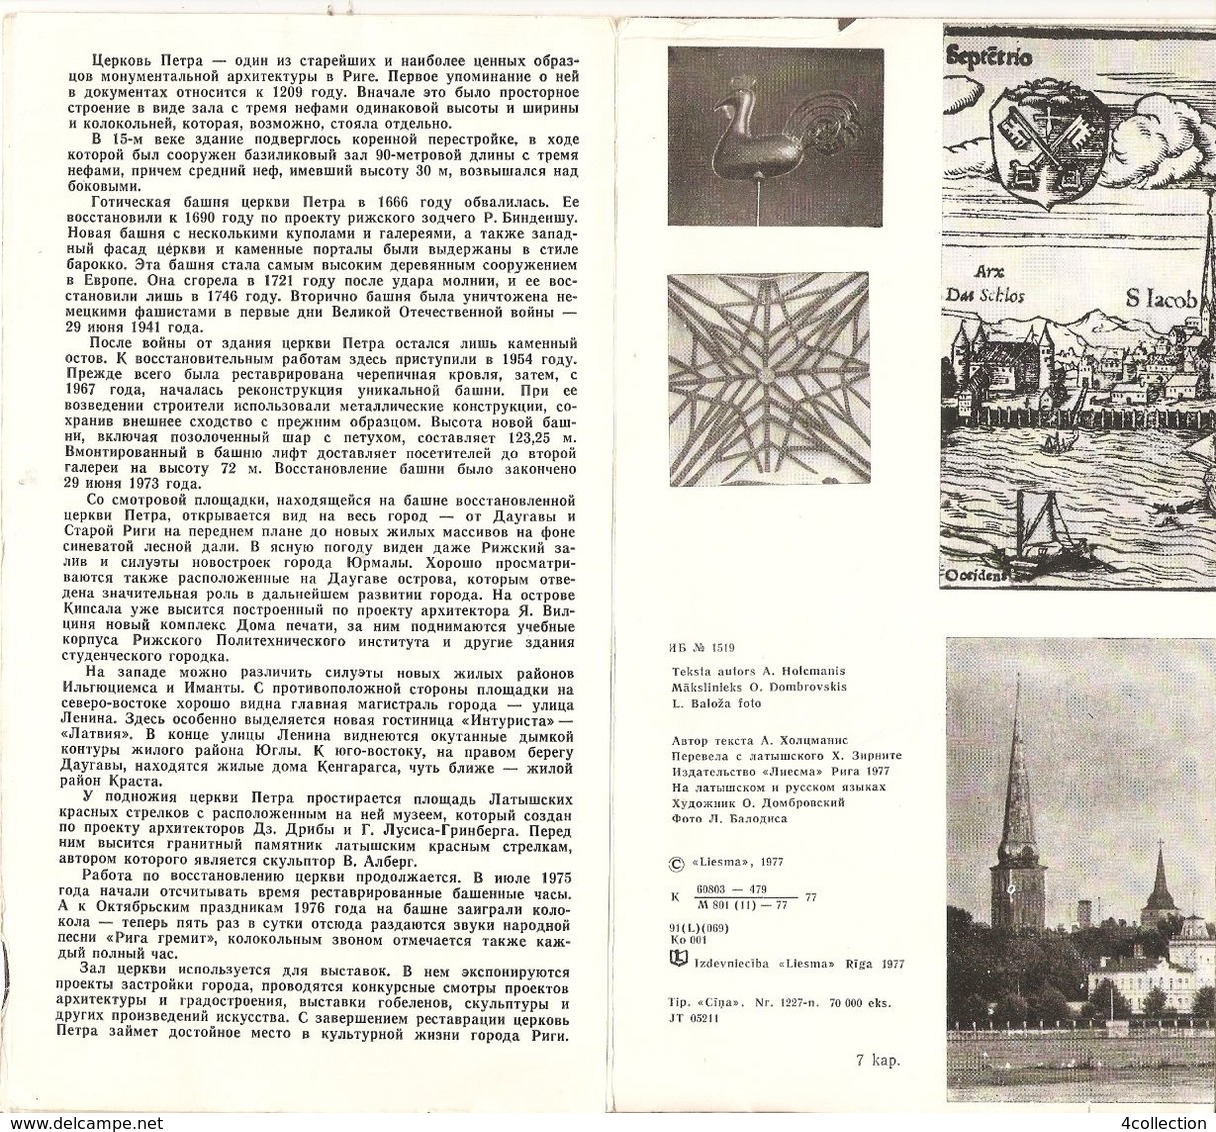 k2 USSR Soviet Riga Liesma 1977 Brochure illustrated about what the church of Peter tells by Holcmanis russian latvian